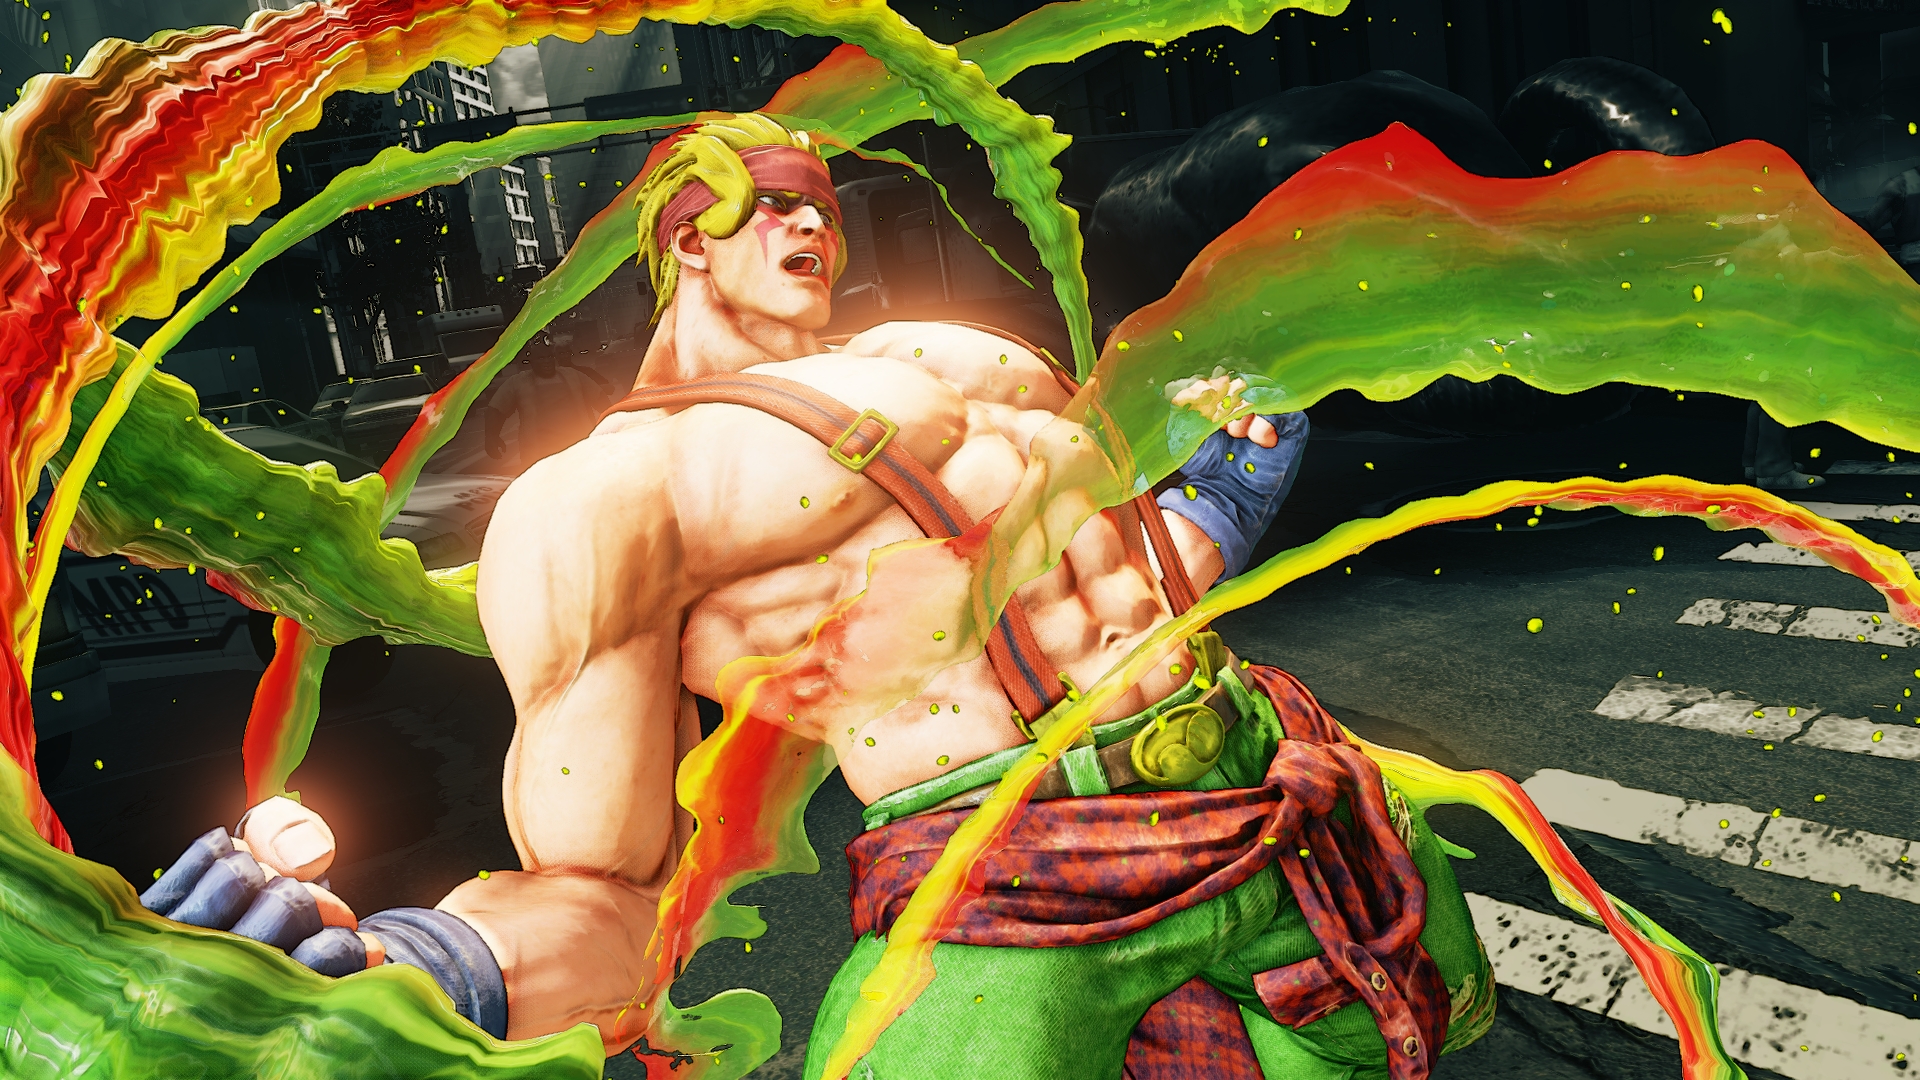 Tekken 7 Story Mode, Rage Quitting, and Cross-Play Details